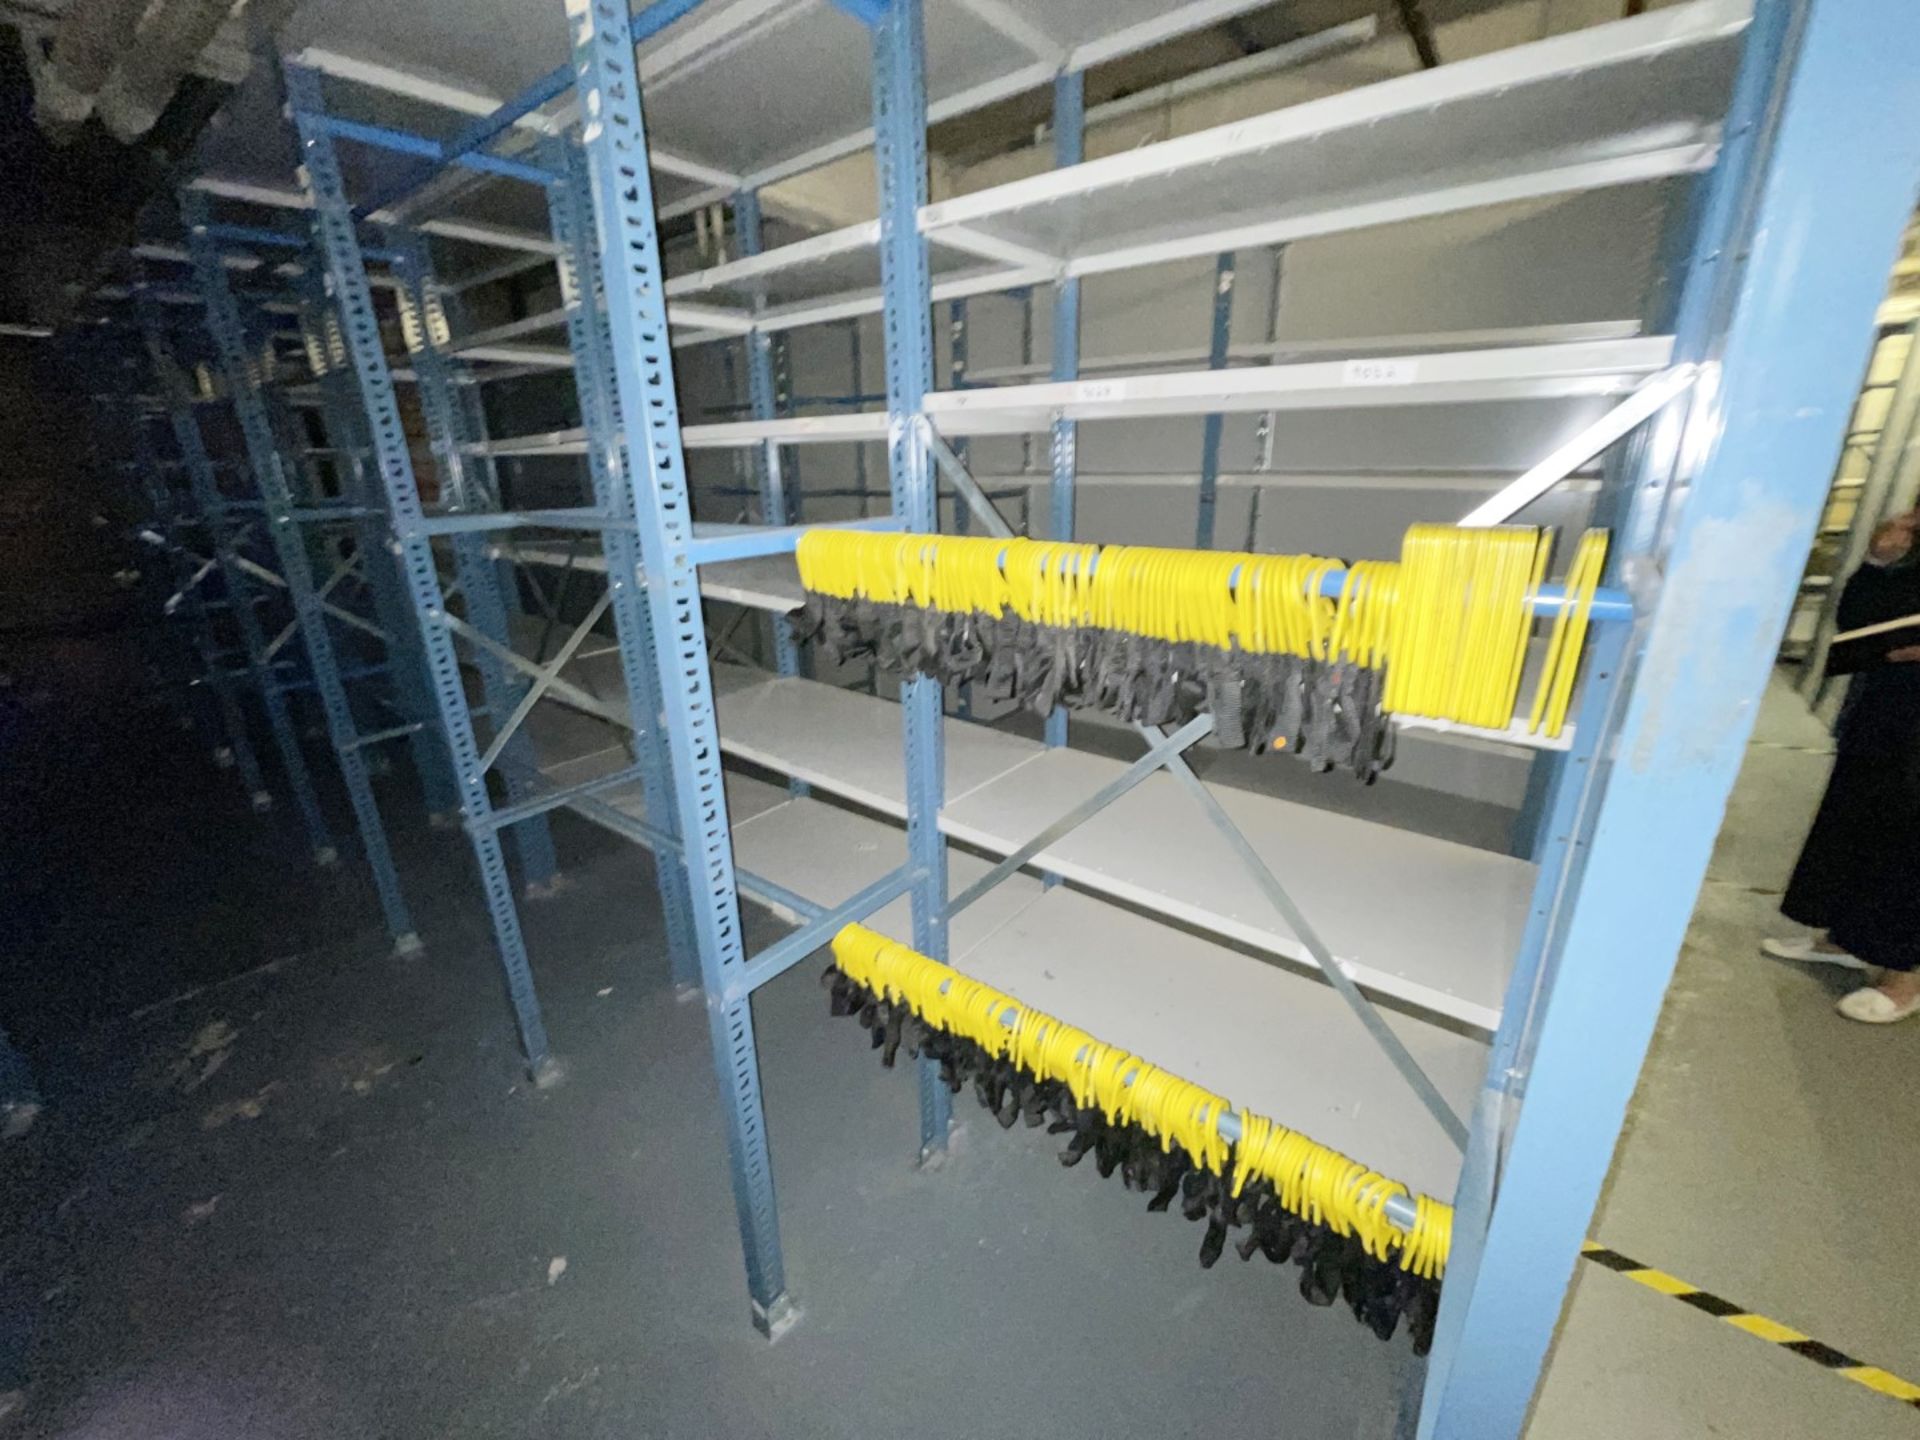 16 x Bays of Metal Warehouse Storage Shelving and Clothes Rails - Includes 8 x Shelving Bays and 8 x